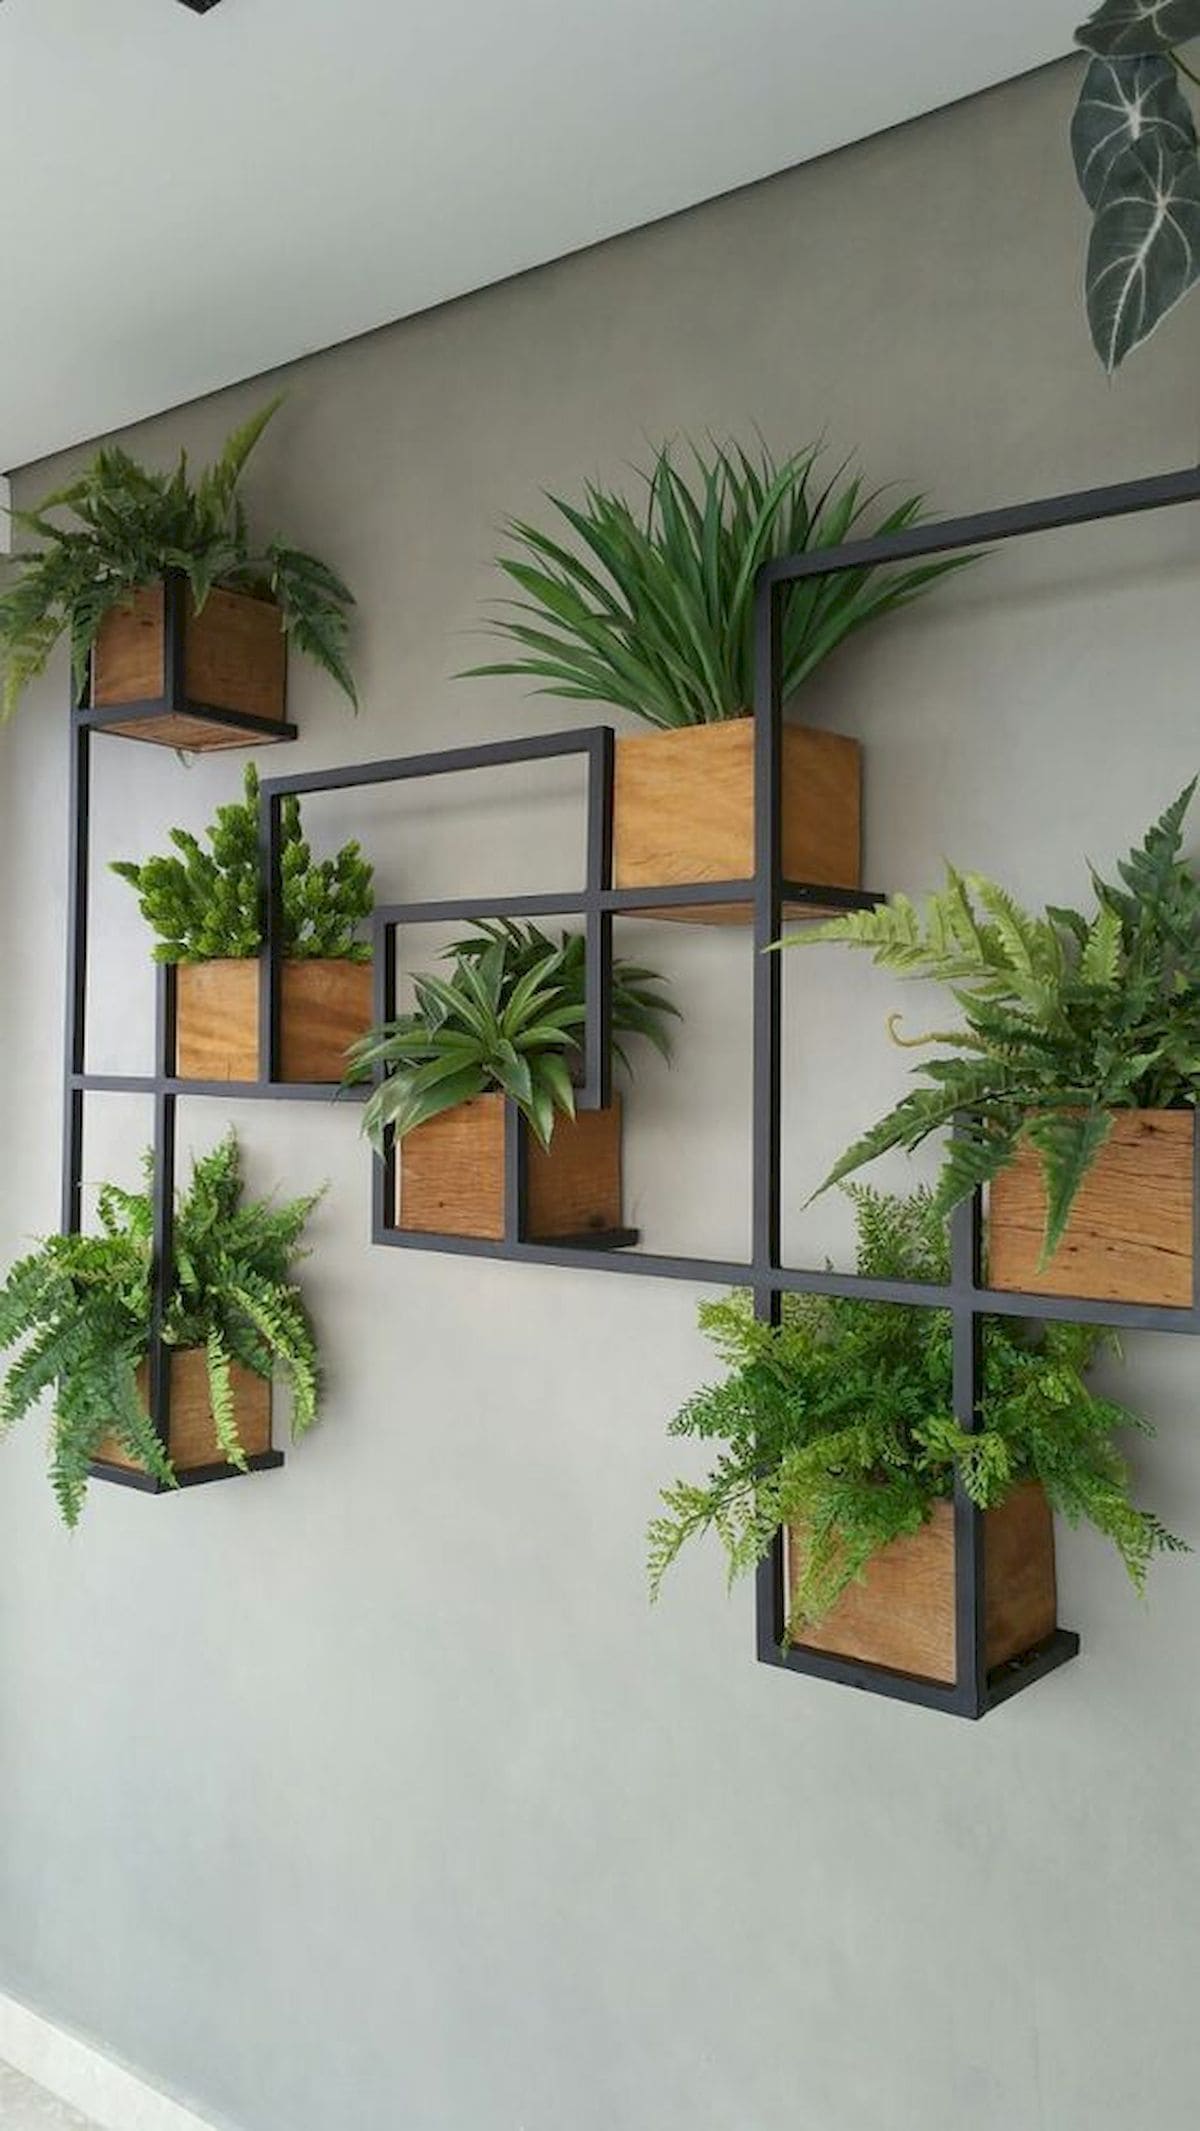 26 creative ideas to make your home greener - 83